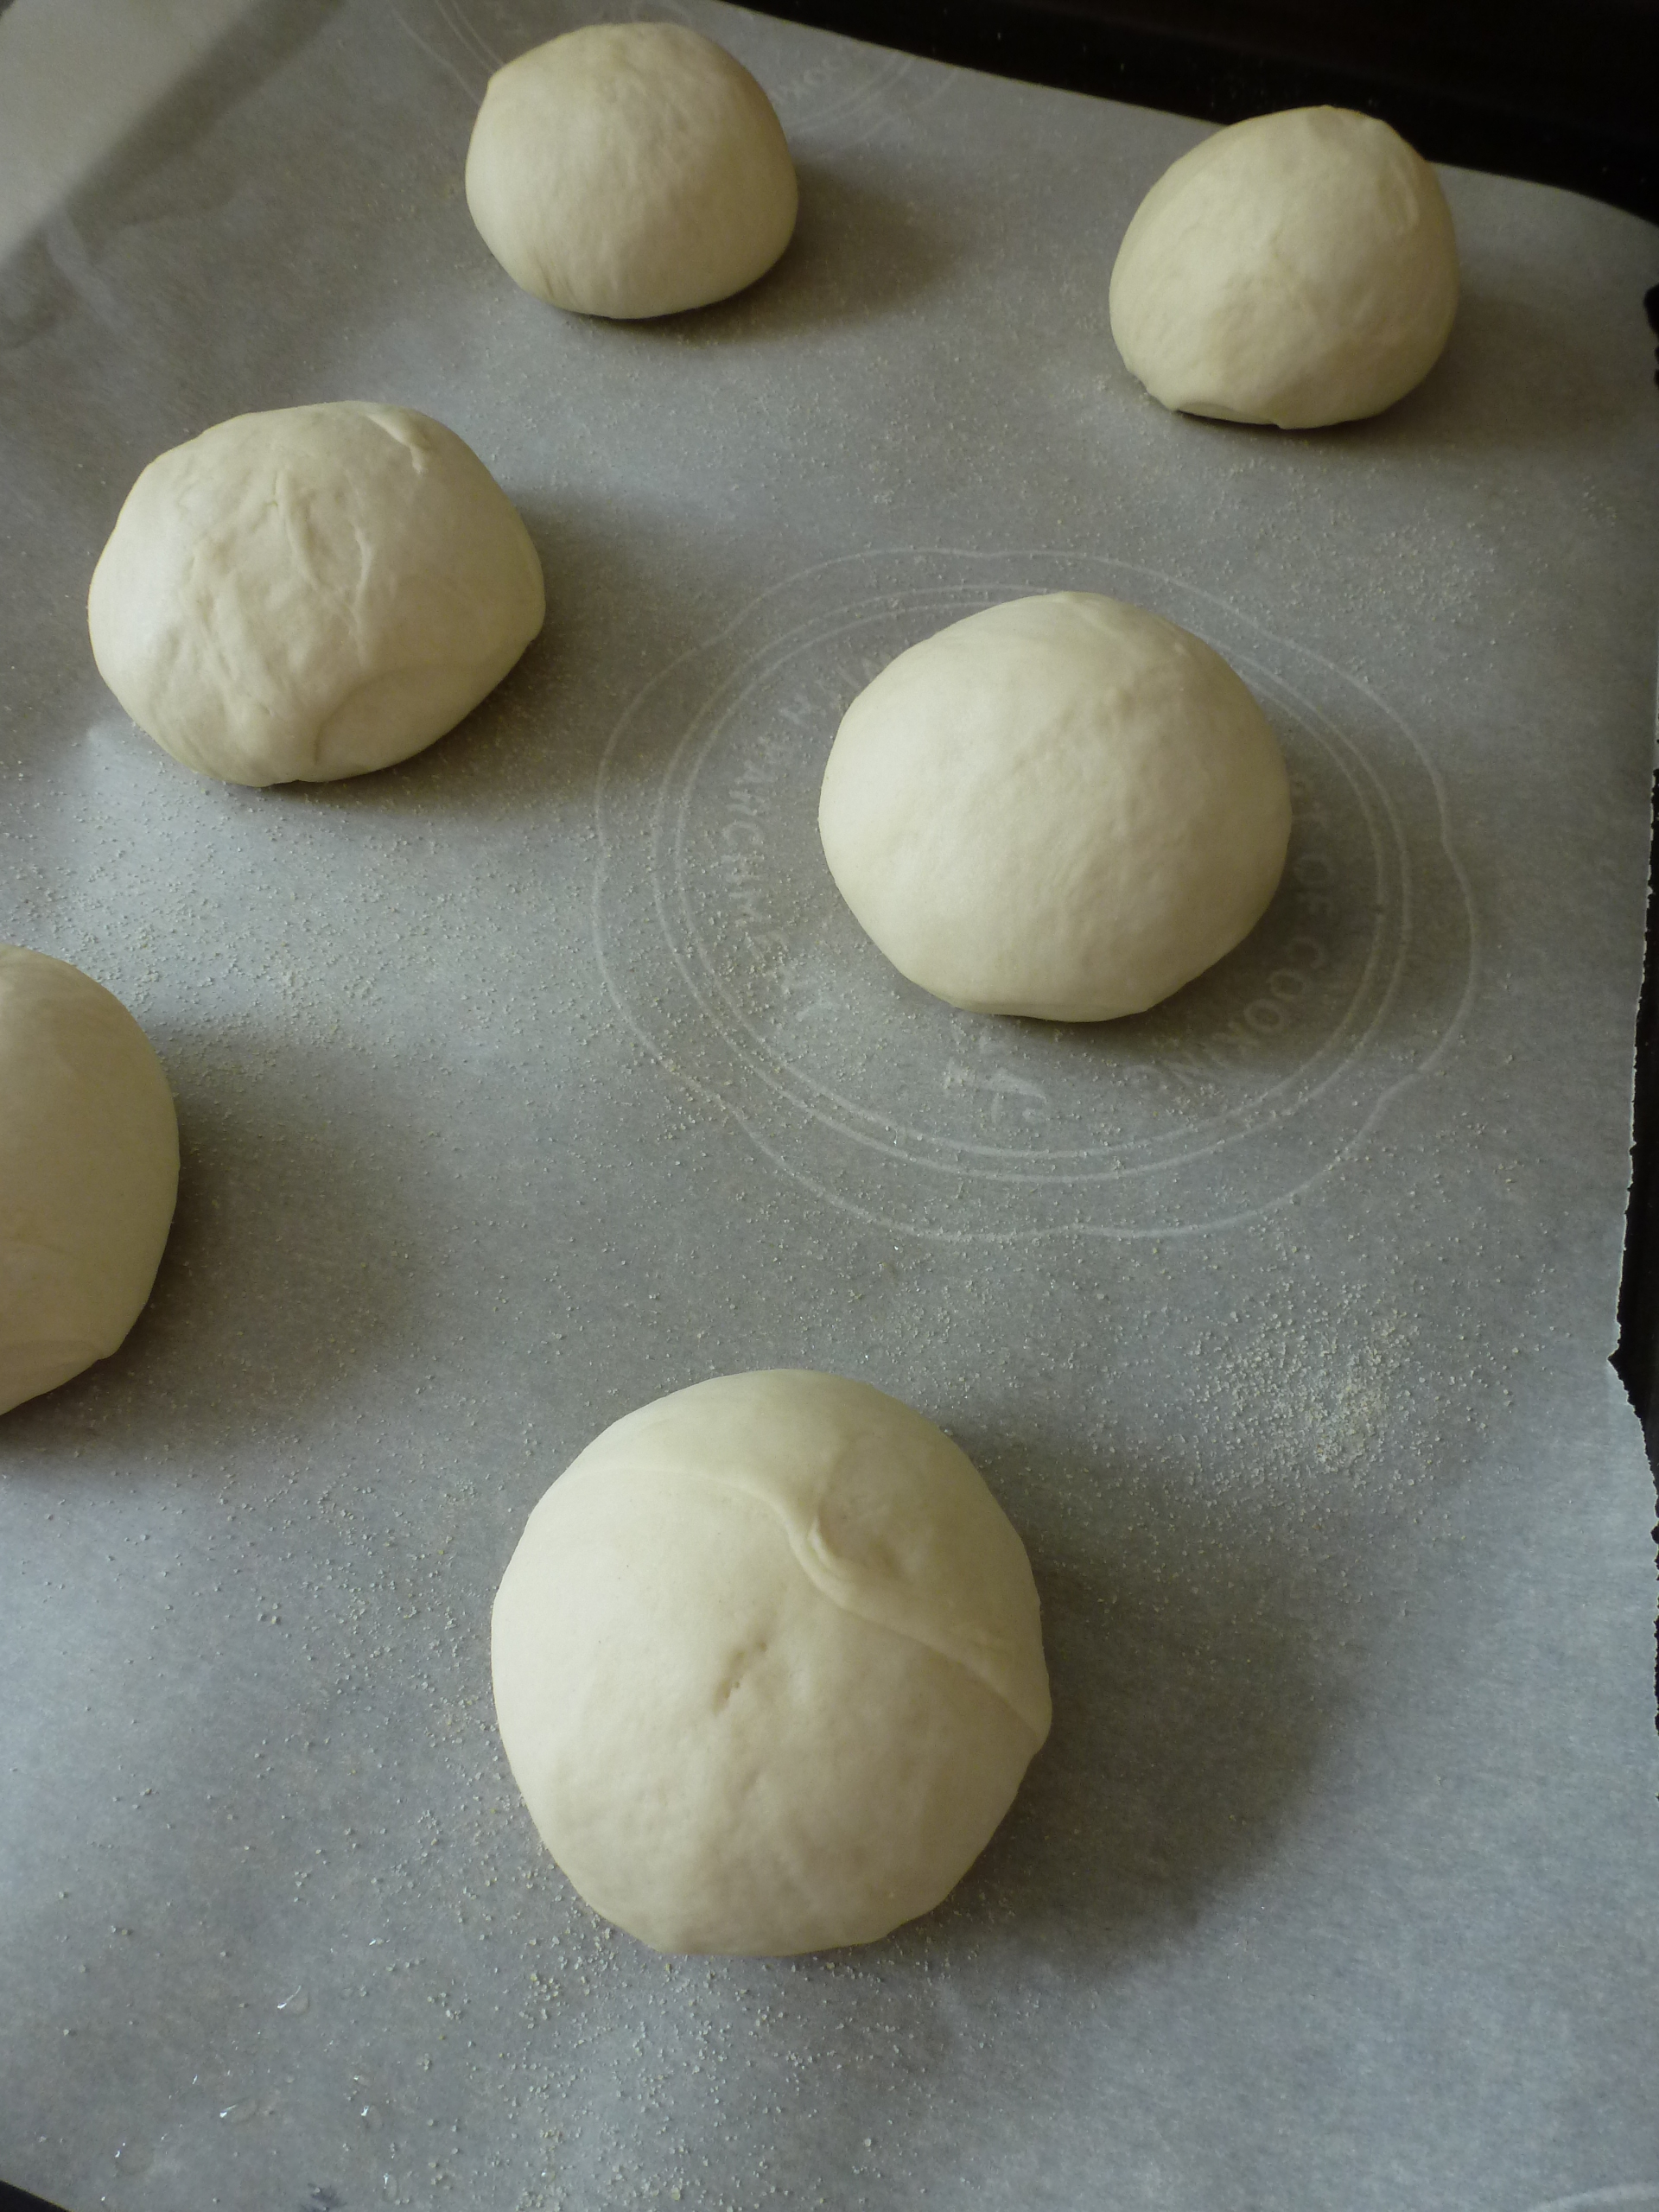 Shaping the English muffin dough into boules for proofing